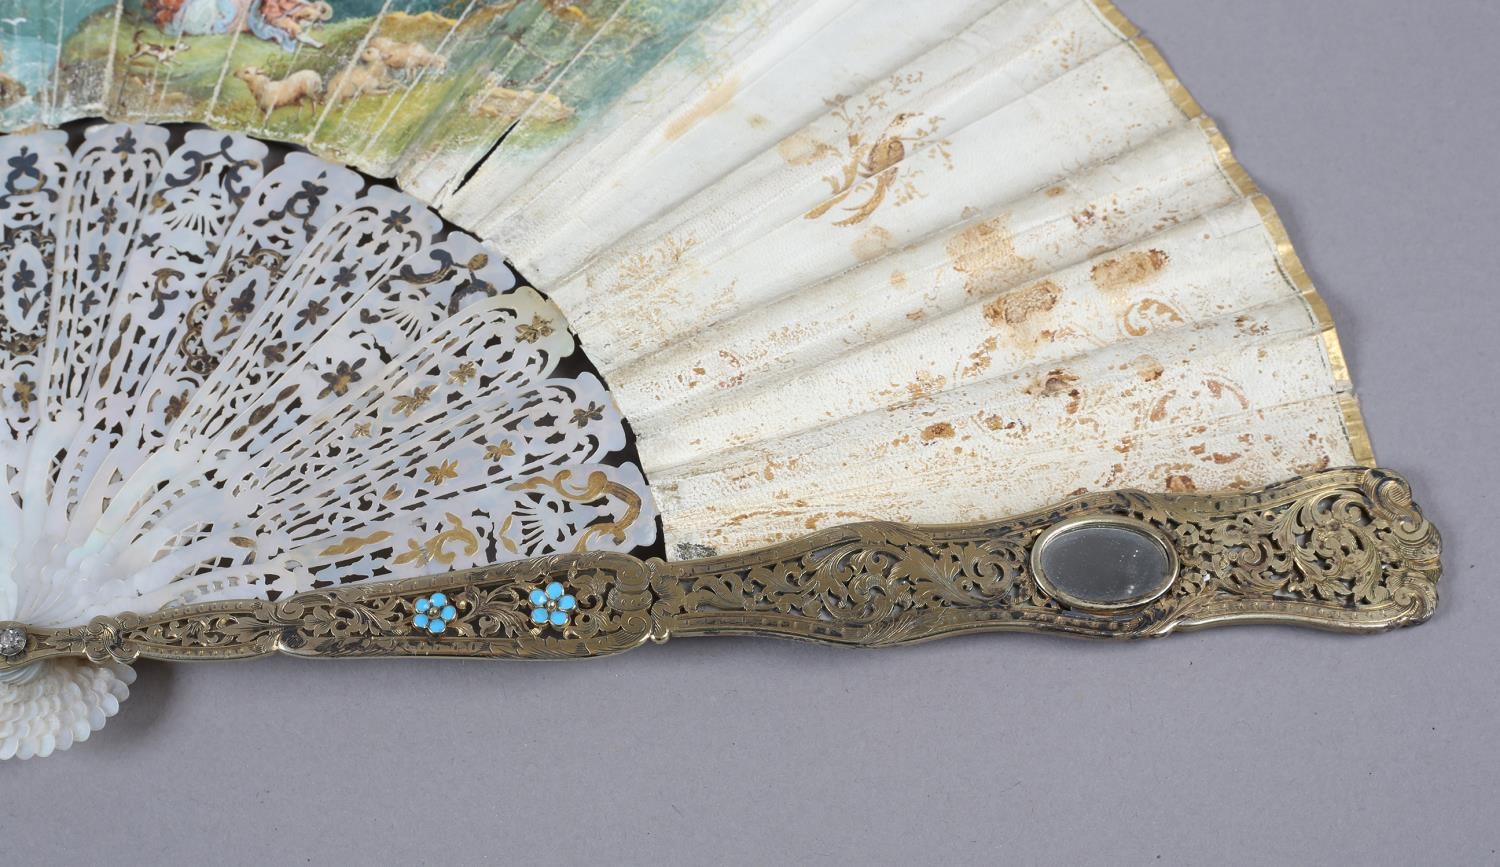 An ornate mid-19th century mother of pearl fan, the guards entirely of carved and pierced gilt - Image 6 of 9